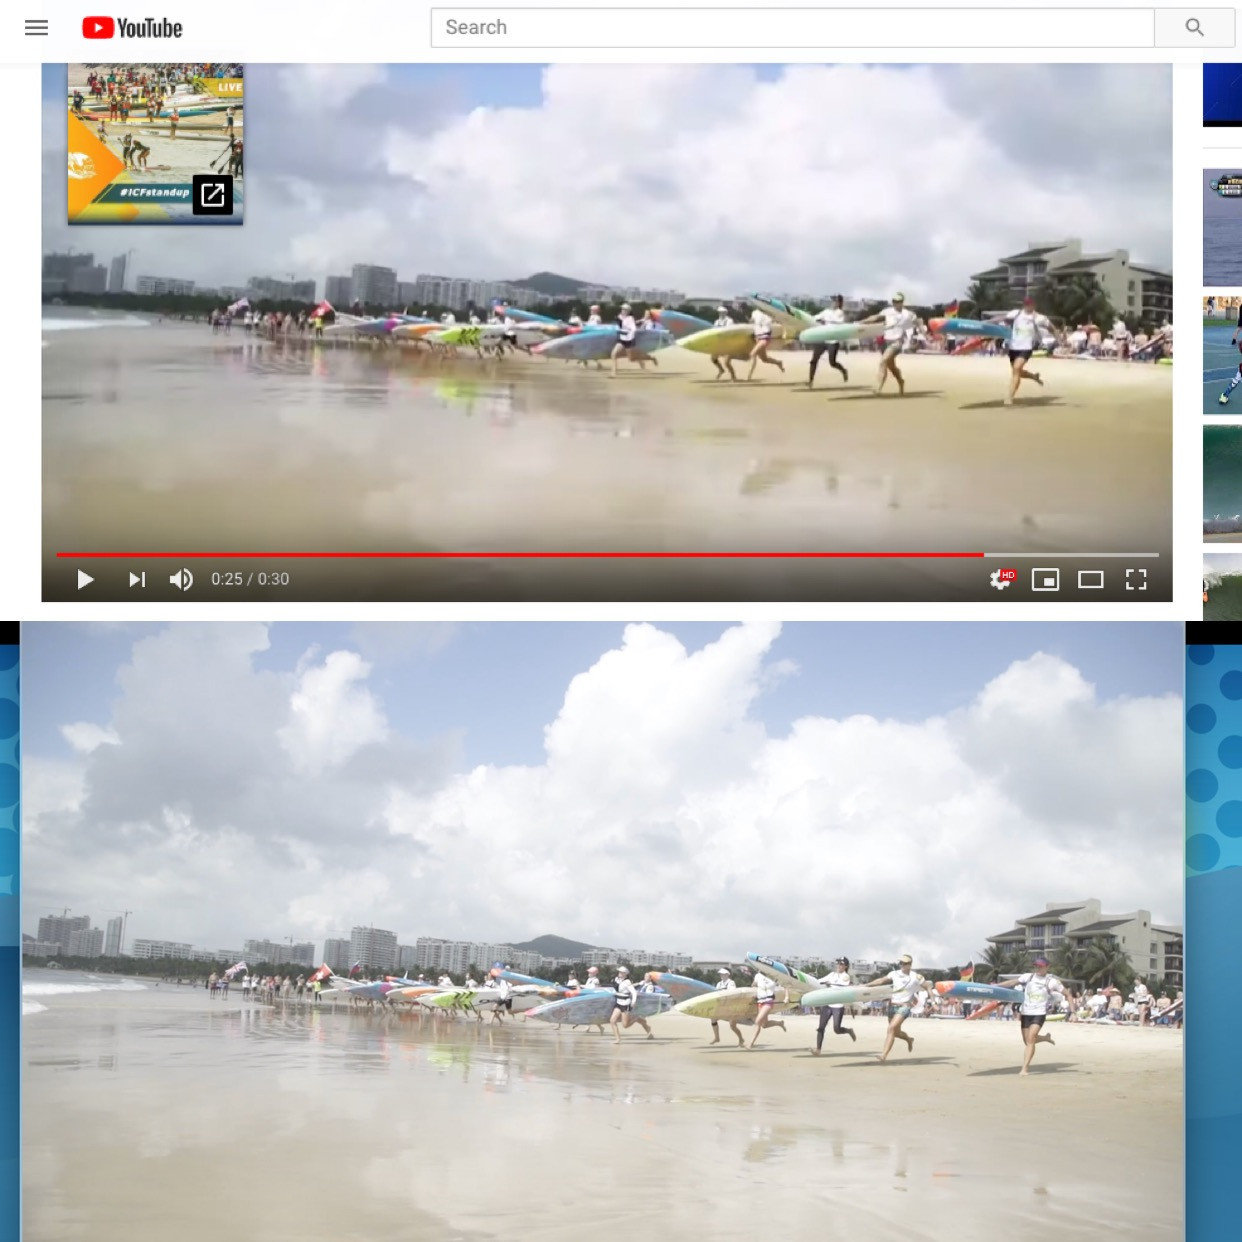 The footage from the ICF's SUP World Championship promotional video ©YouTube